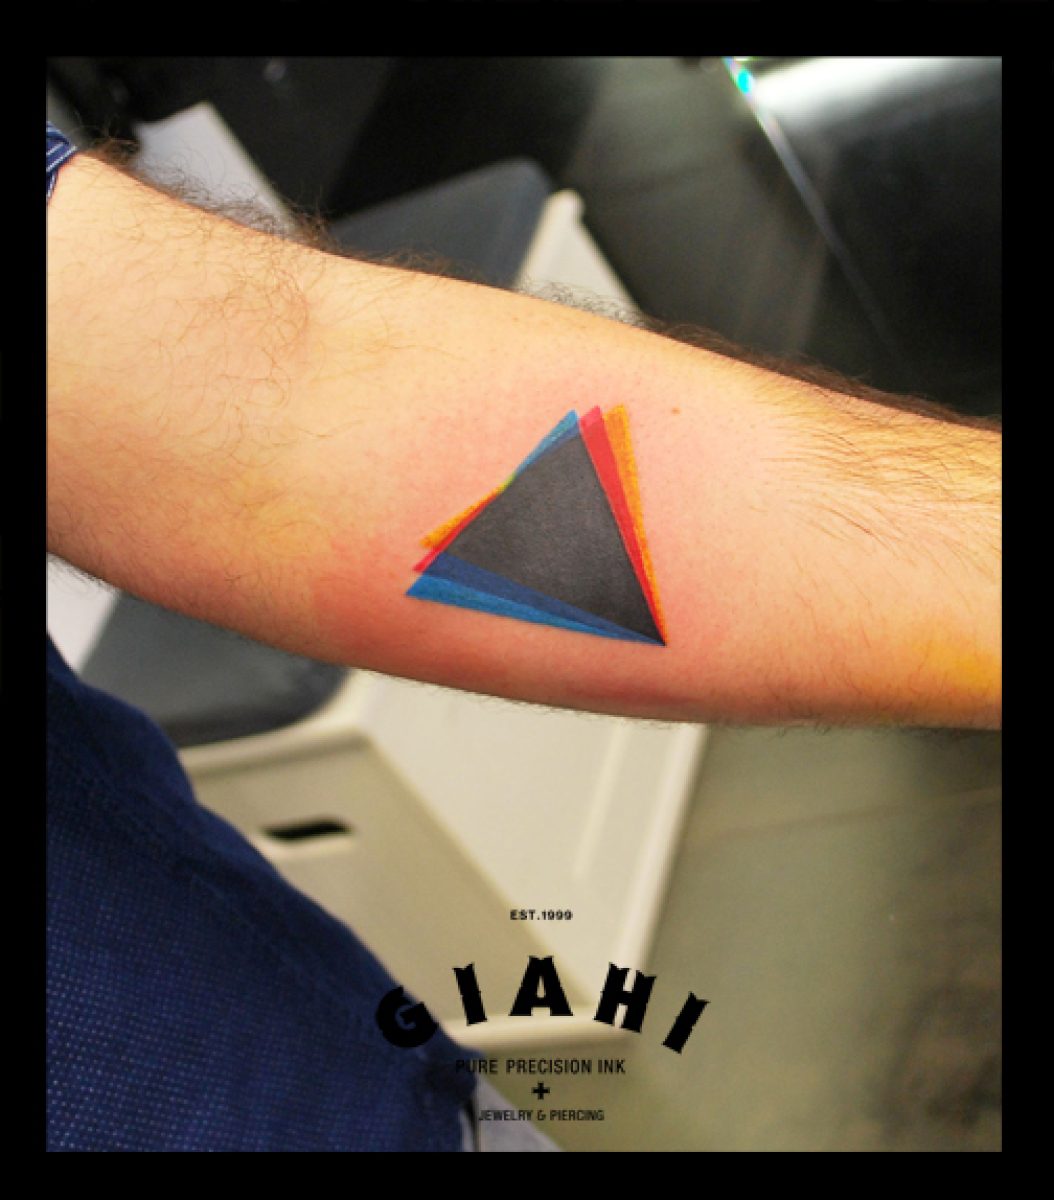 Triangle Tattoos: A Complete Guide With 85 Images - AuthorityTattoo